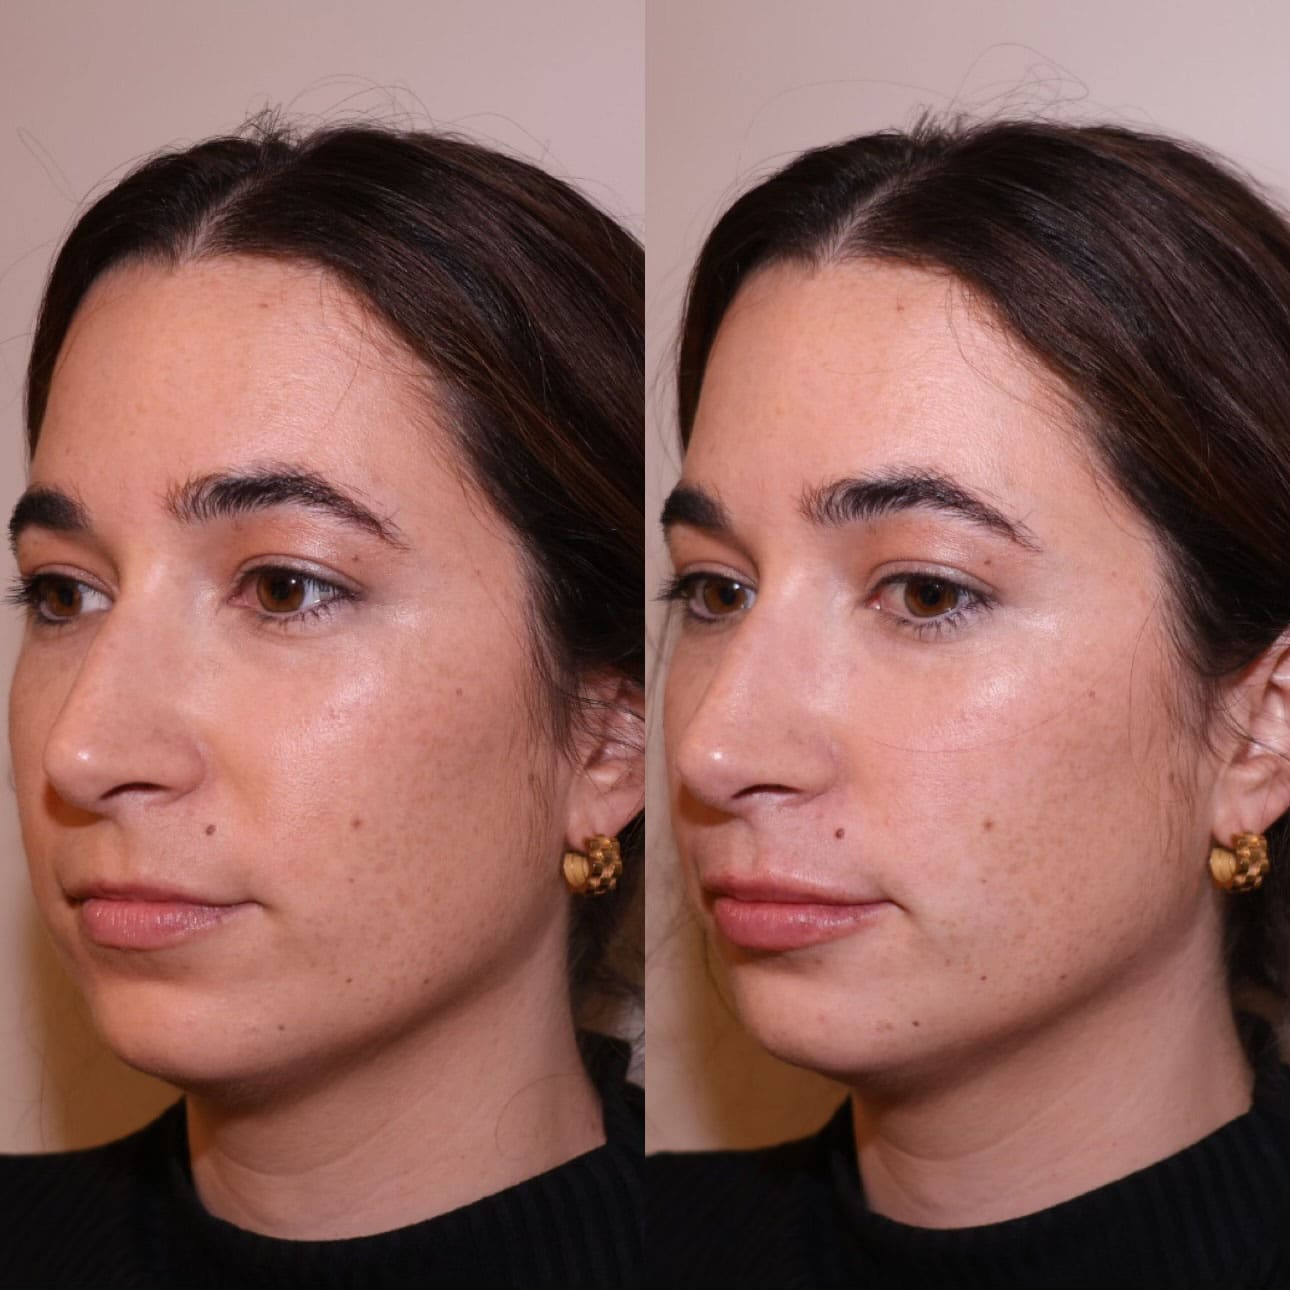 Patient before and after mini lip plump filler